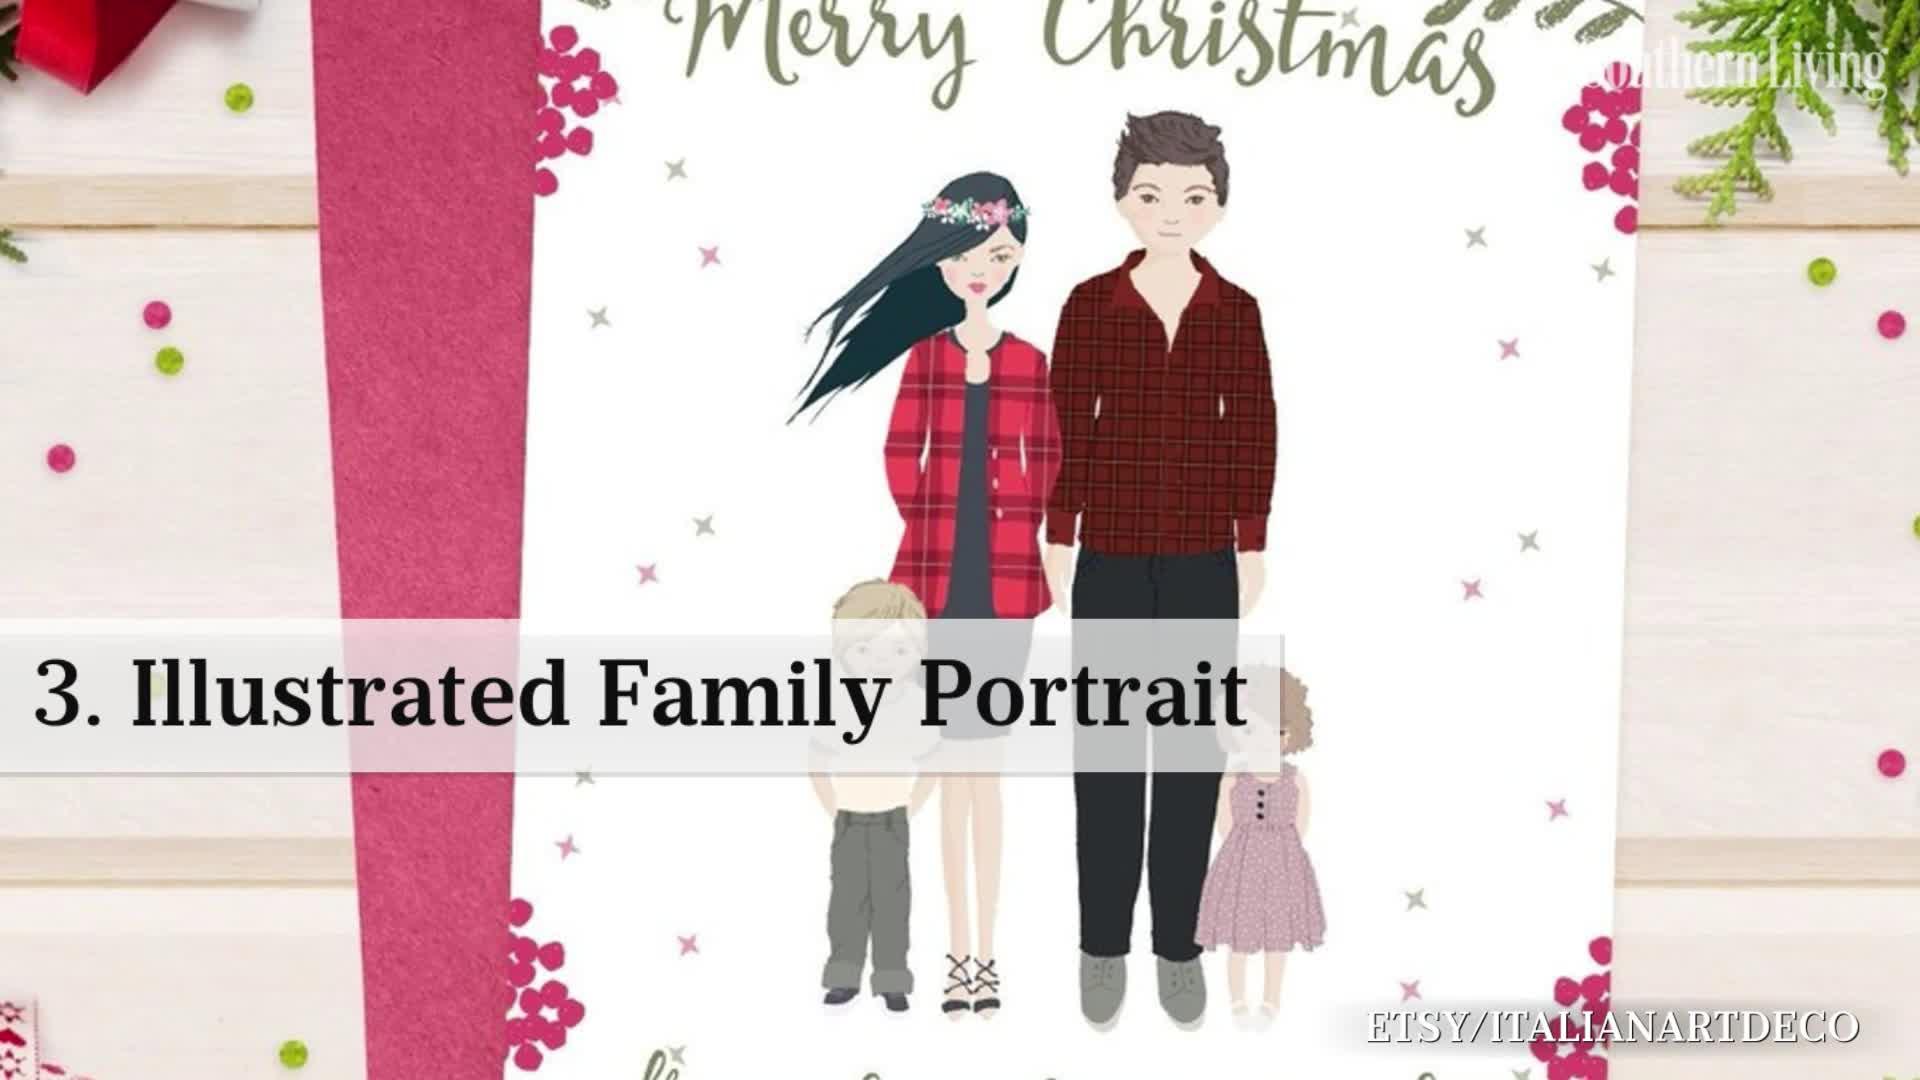 Our Favorite Festive Christmas Card Designs from Etsy